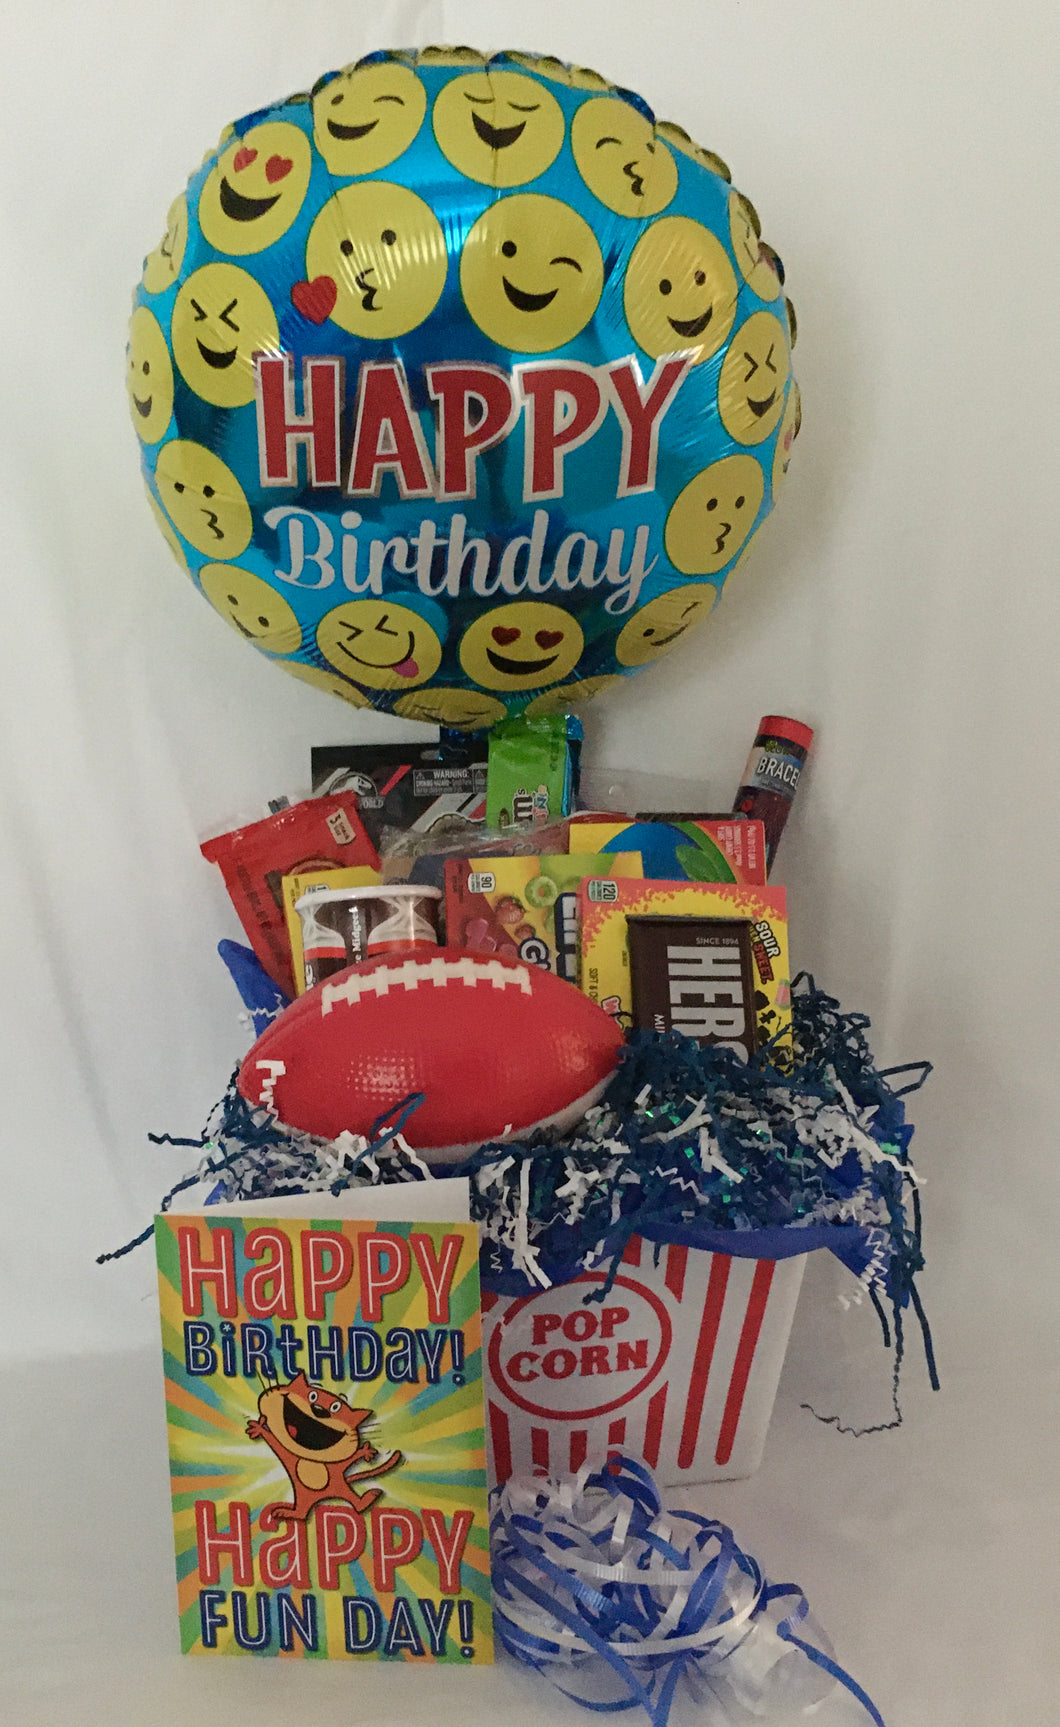 Happy Birthday, Movie Box is a reusable popcorn box filled with fun treats and toys custom-made for a little boy or girl. We can customize this box with candy, stickers, crayons, treats, popcorn, nerf football, stickers, glow sticks, balloons, cards, and so much more! We will shrink-wrap it beautifully with a handmade bow and notecard. 